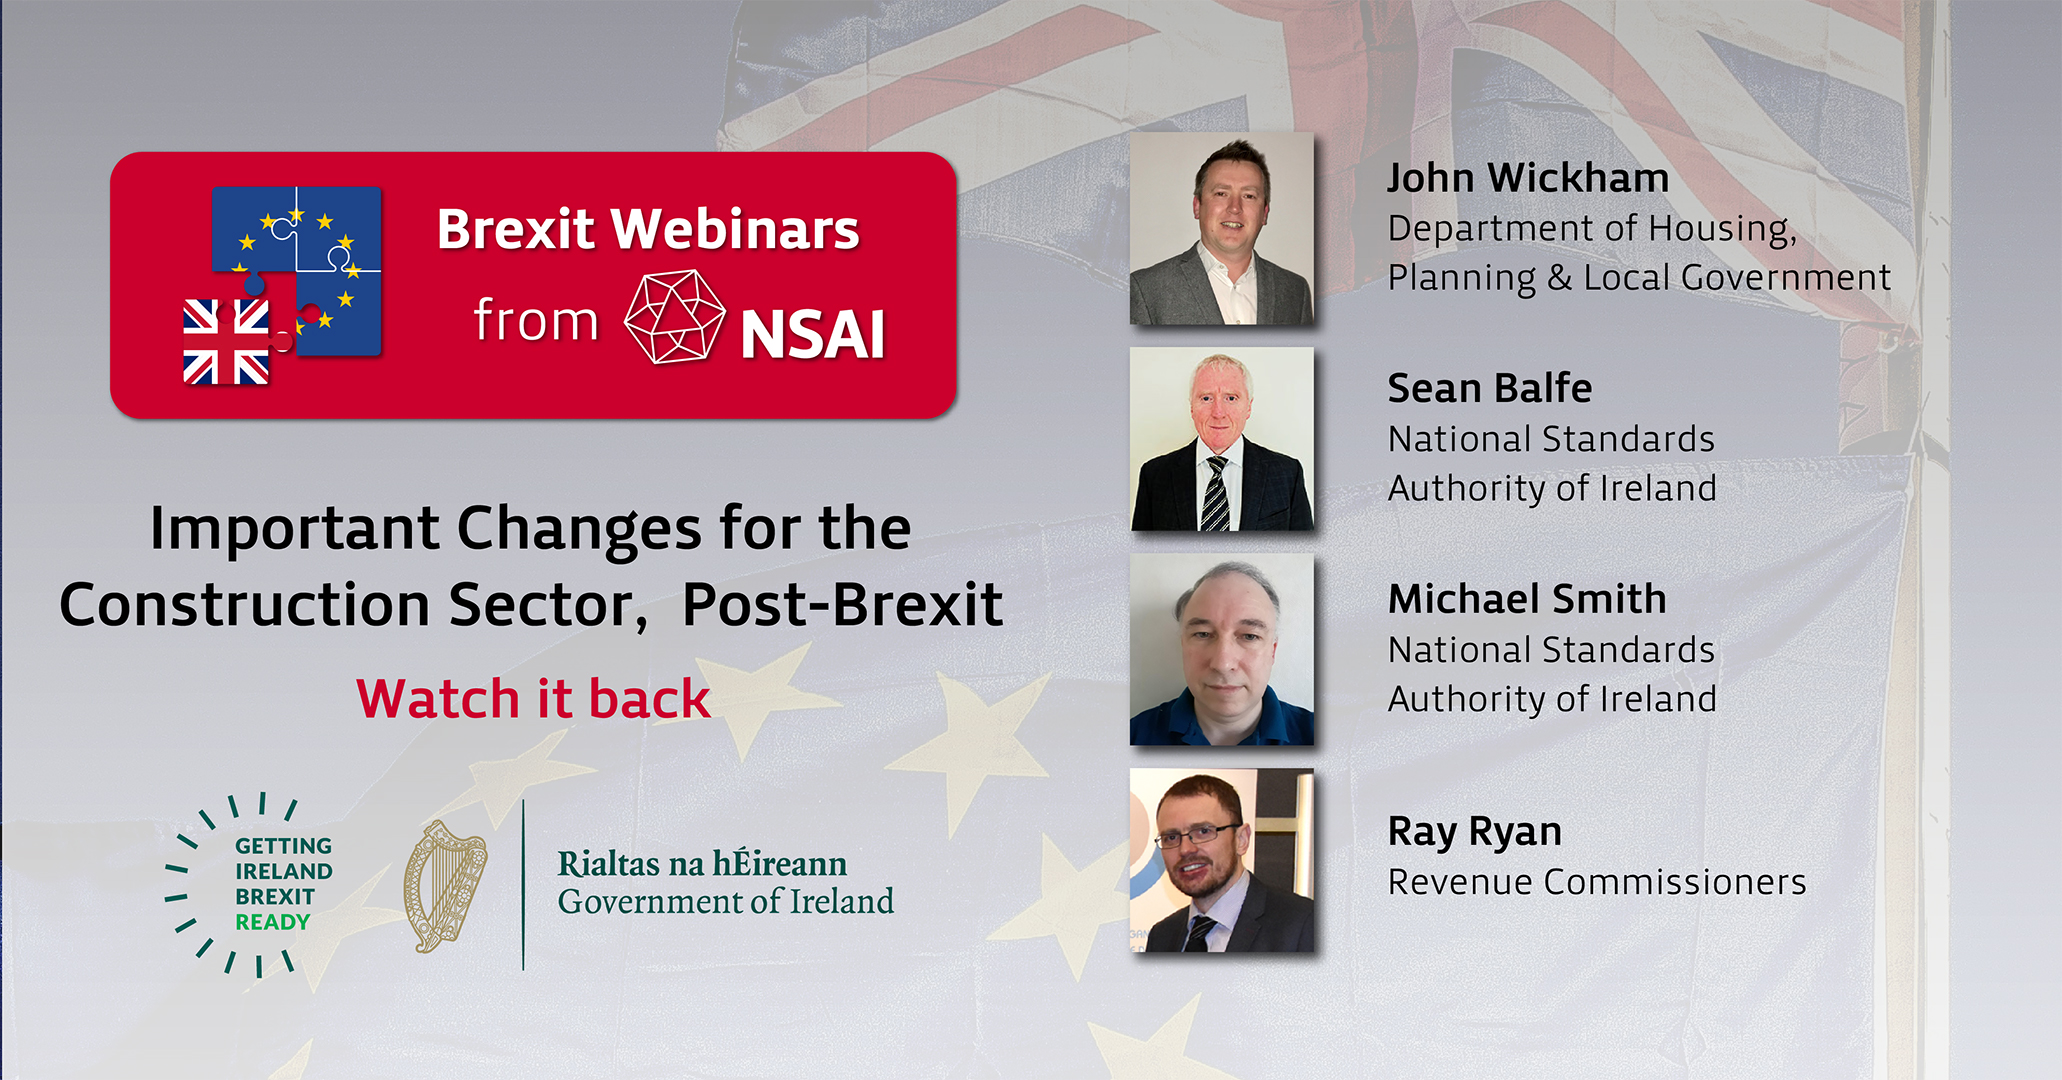 Brexit Webinars from NSAI Important Changes for the Construction Sector, Post-Brexit Watch it back with John Wickham Department of Housing, Planning & Legal Government, Sean Balfe National Standards Authority of Ireland, Michael Smith National Standards Authority of Ireland and Ray Ryan Revenue Commissioners